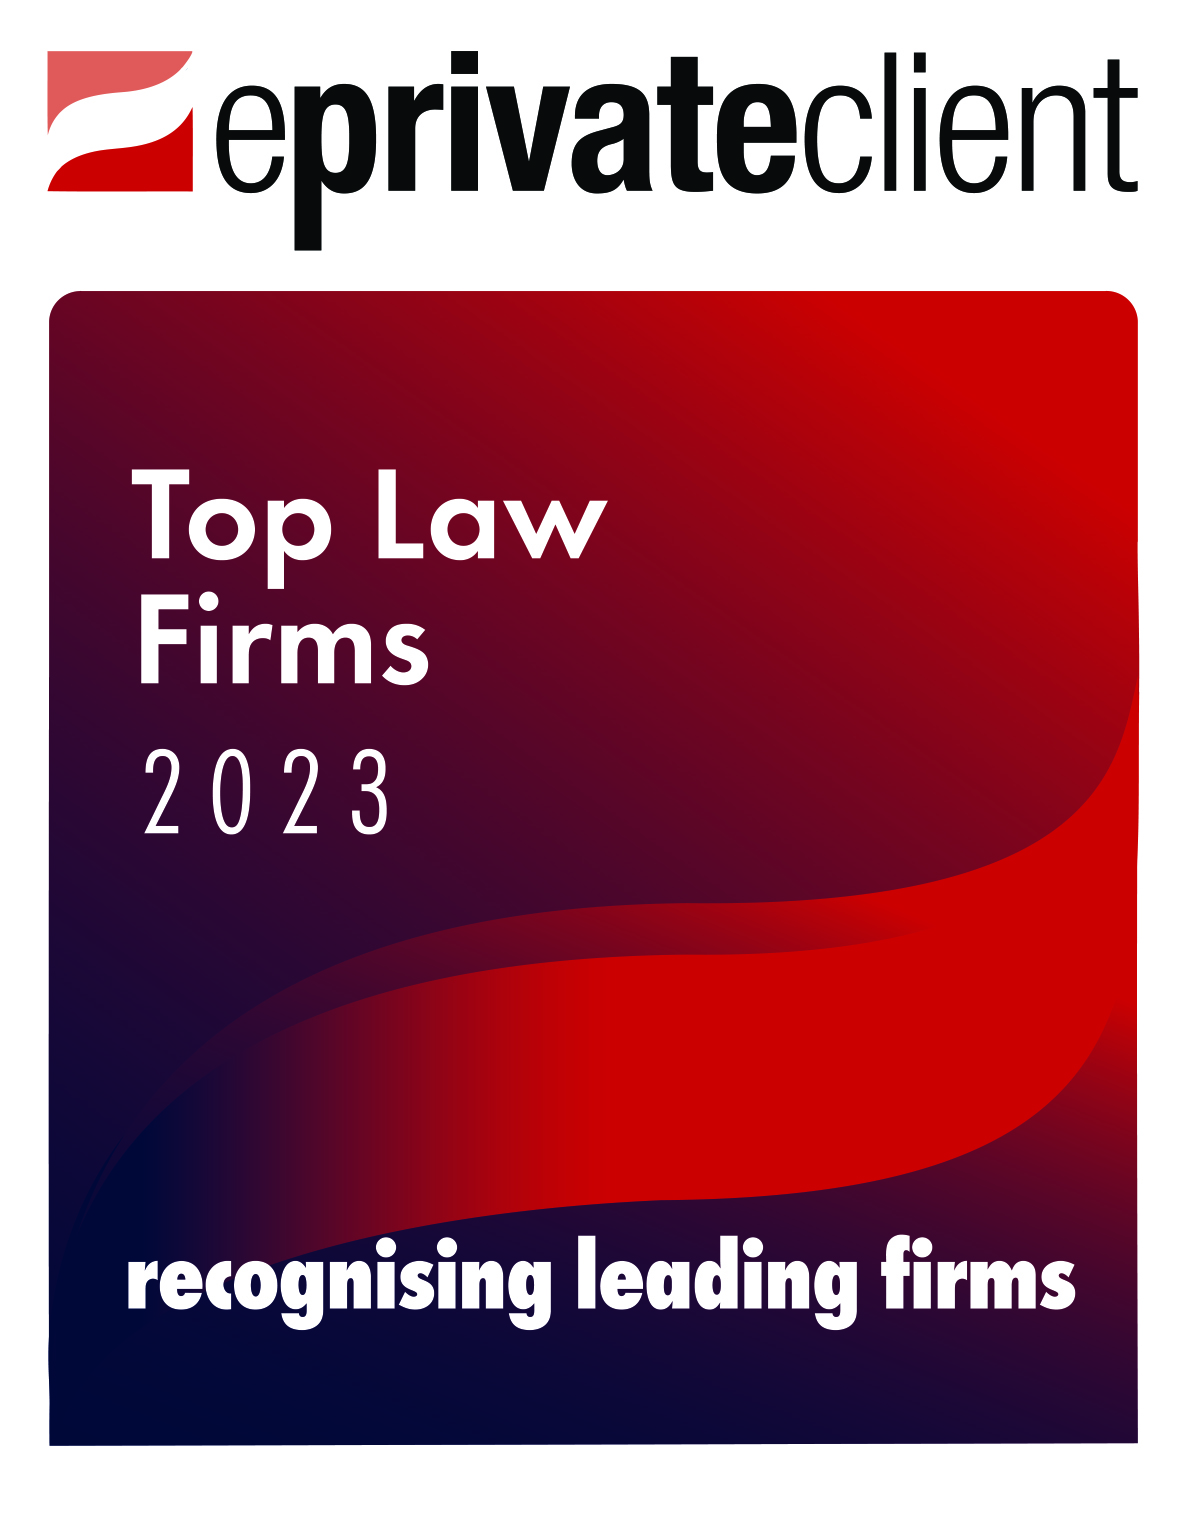 EXCLUSIVE: 2023 eprivateclient Top Law Firms revealed